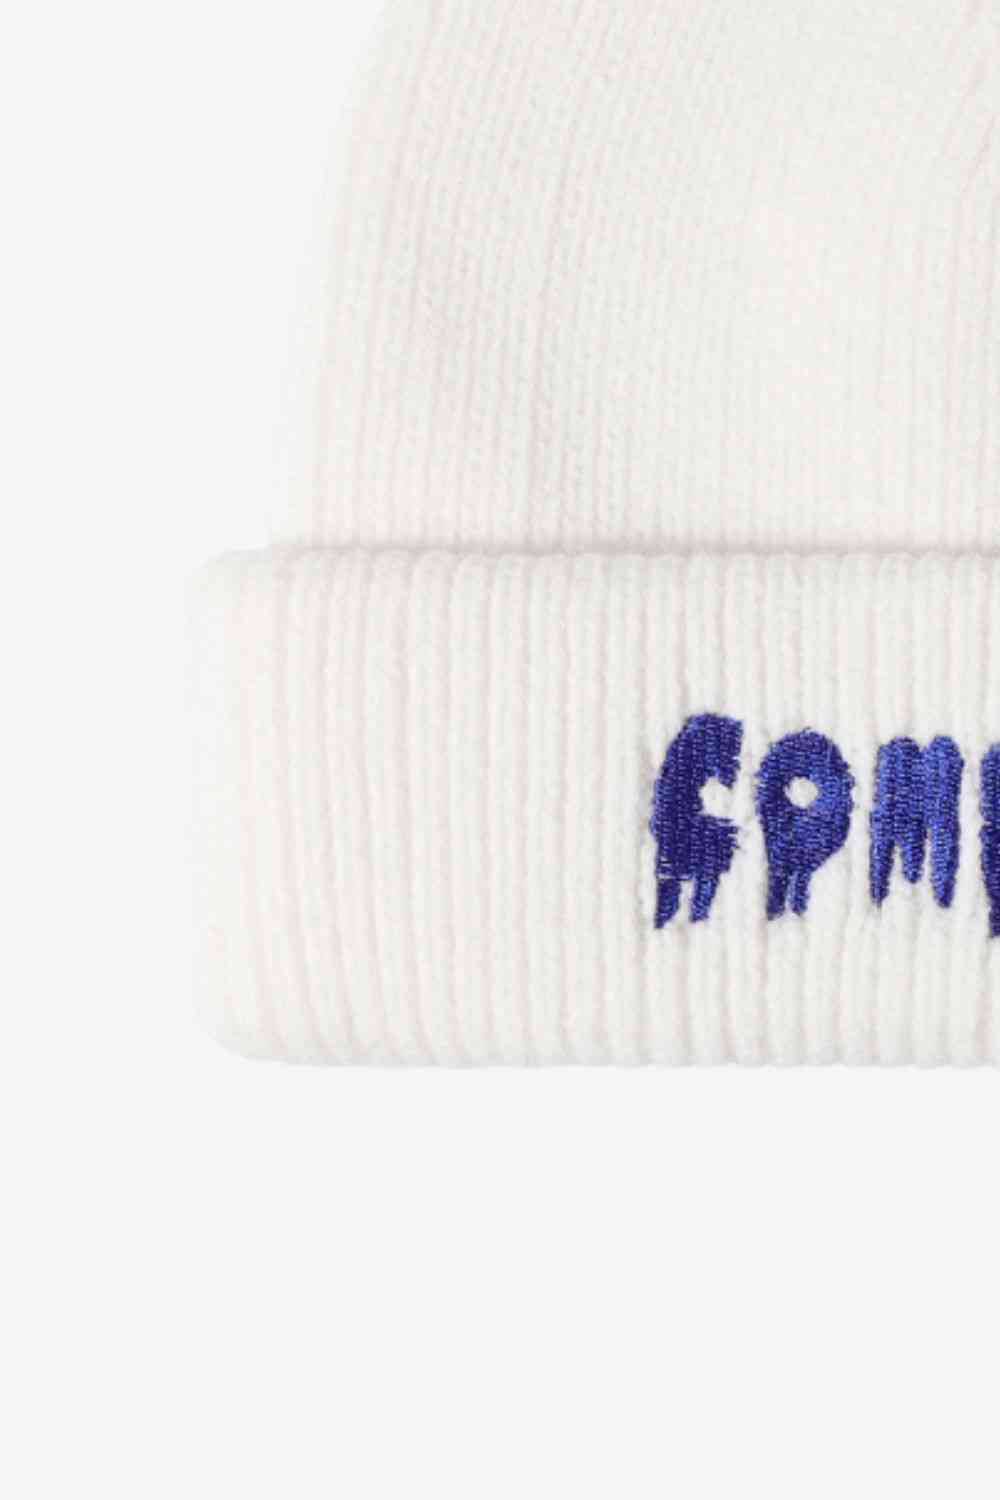 COME ON Embroidered Cuff Knit Beanie - Rose Gold Co. Shop